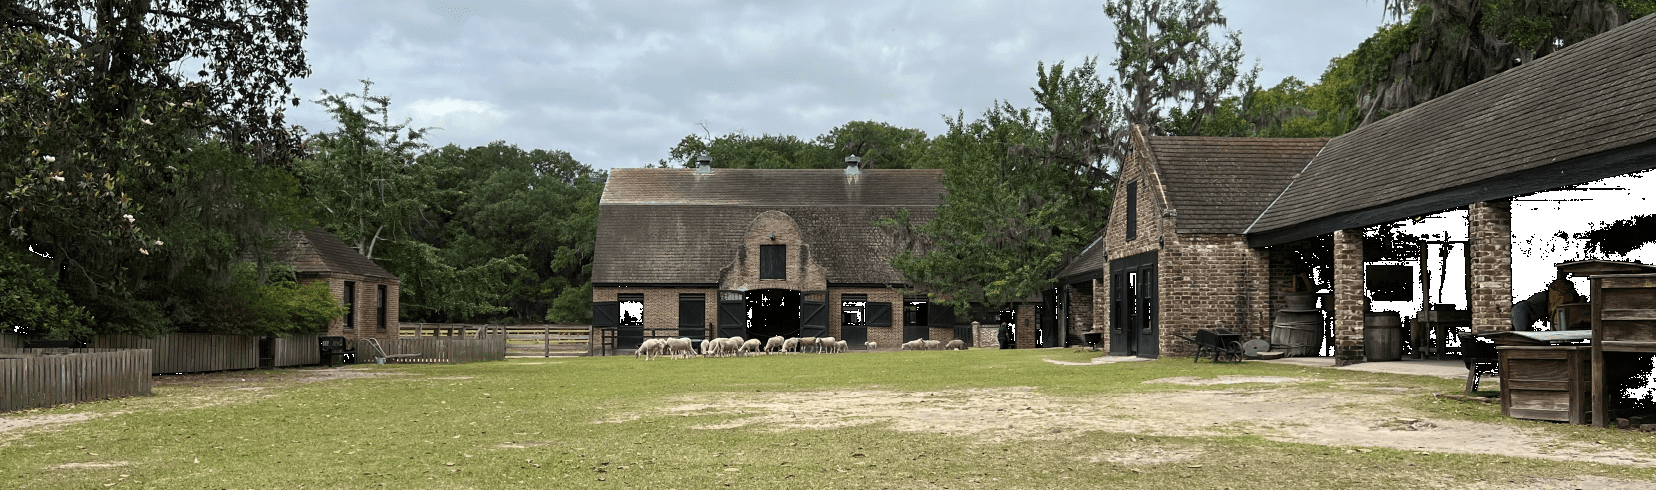 middleton place stable yards